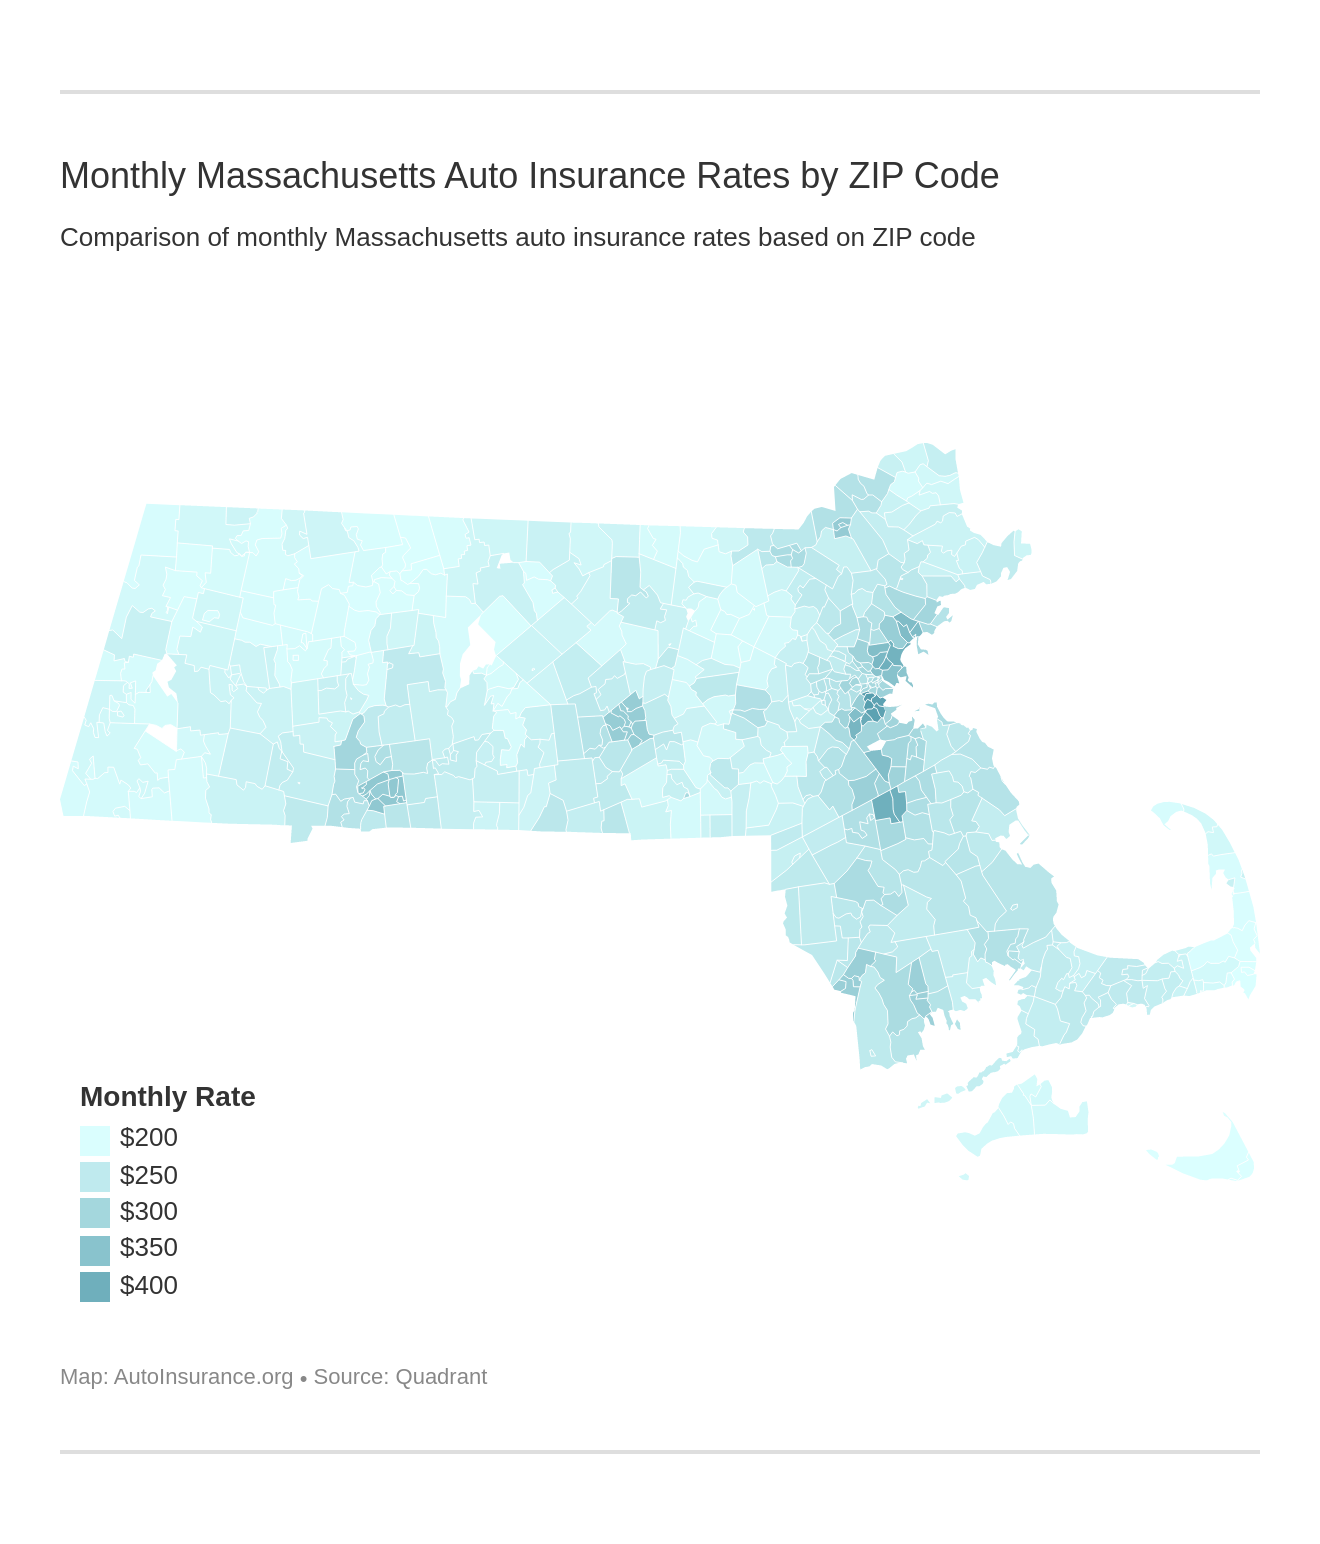 Monthly Massachusetts Auto Insurance Rates by ZIP Code